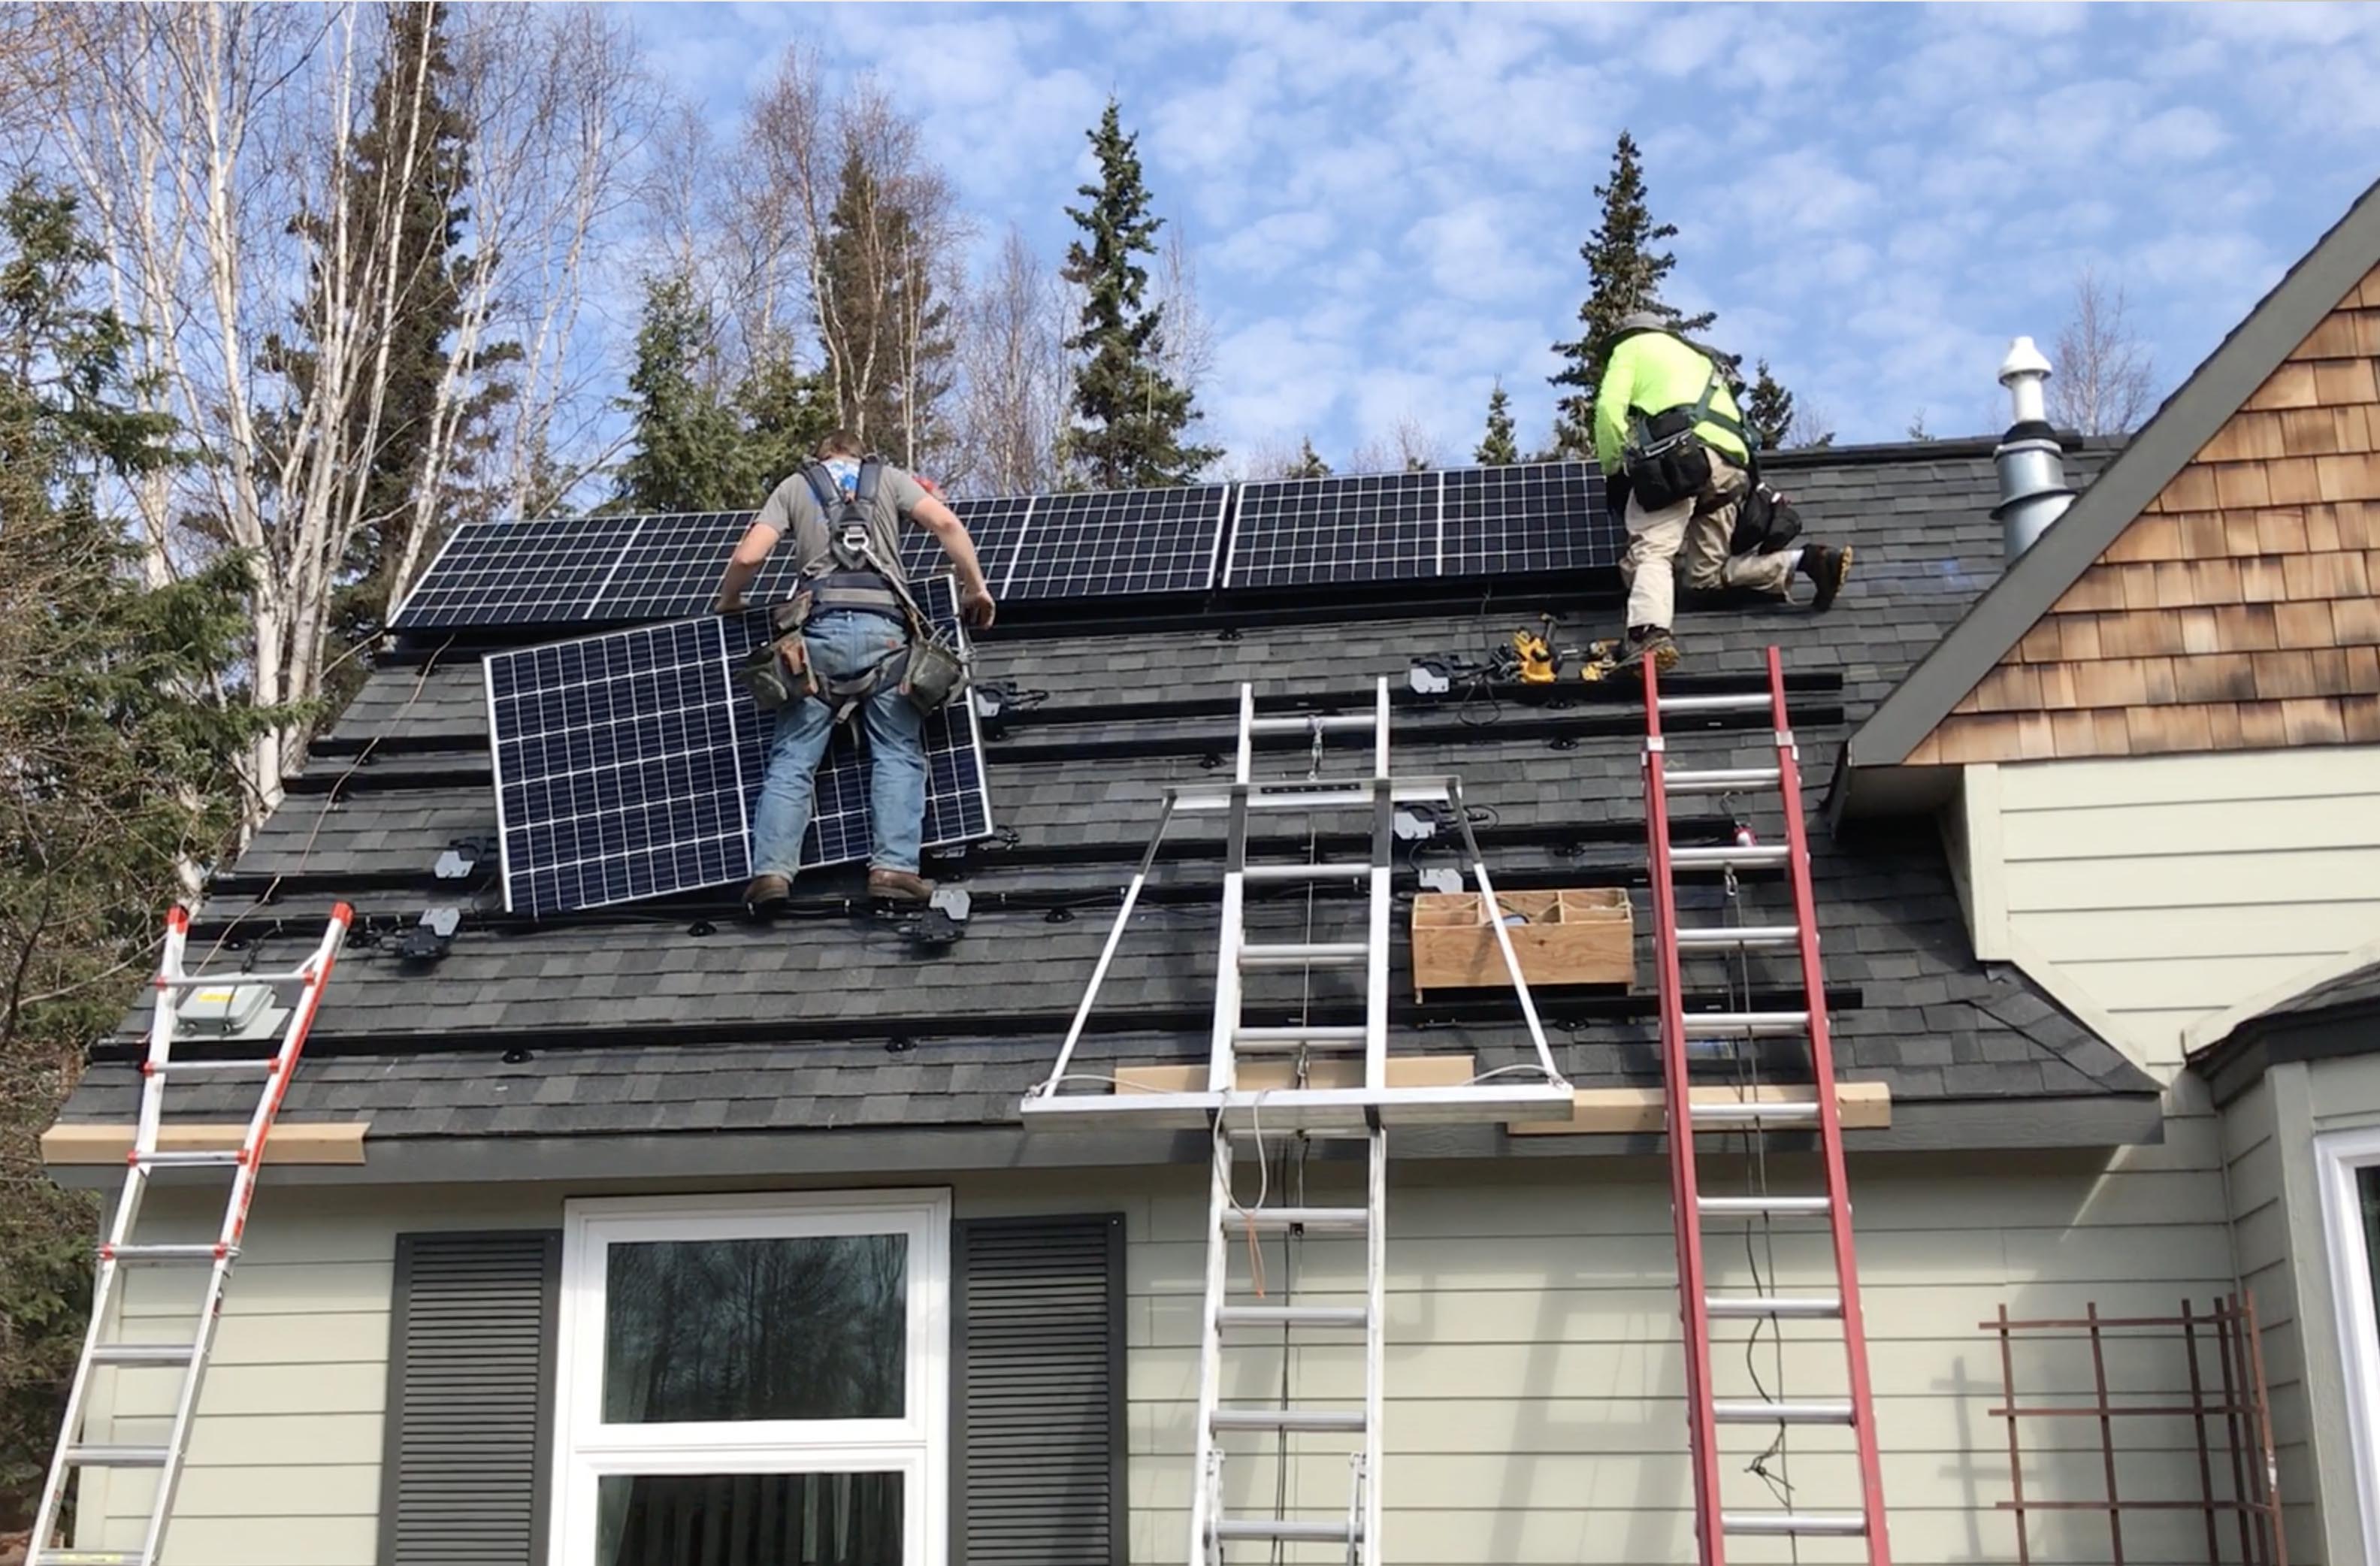 Solar panels being installed on a rooftop by workers